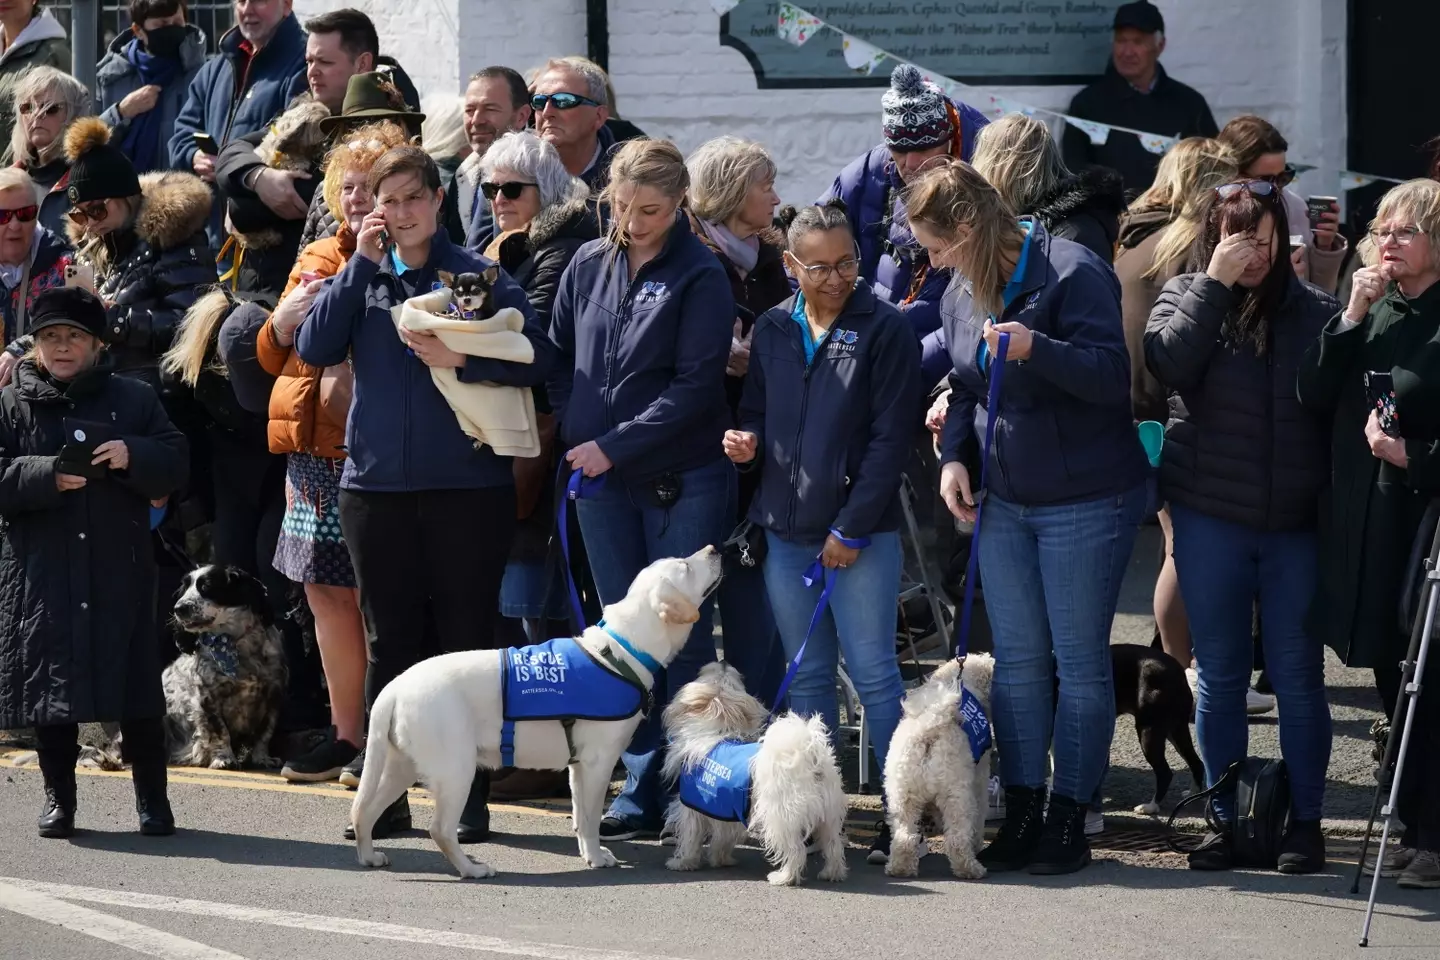 Dogs from Battersea were among the crowds paying their respects to Paul O'Grady.